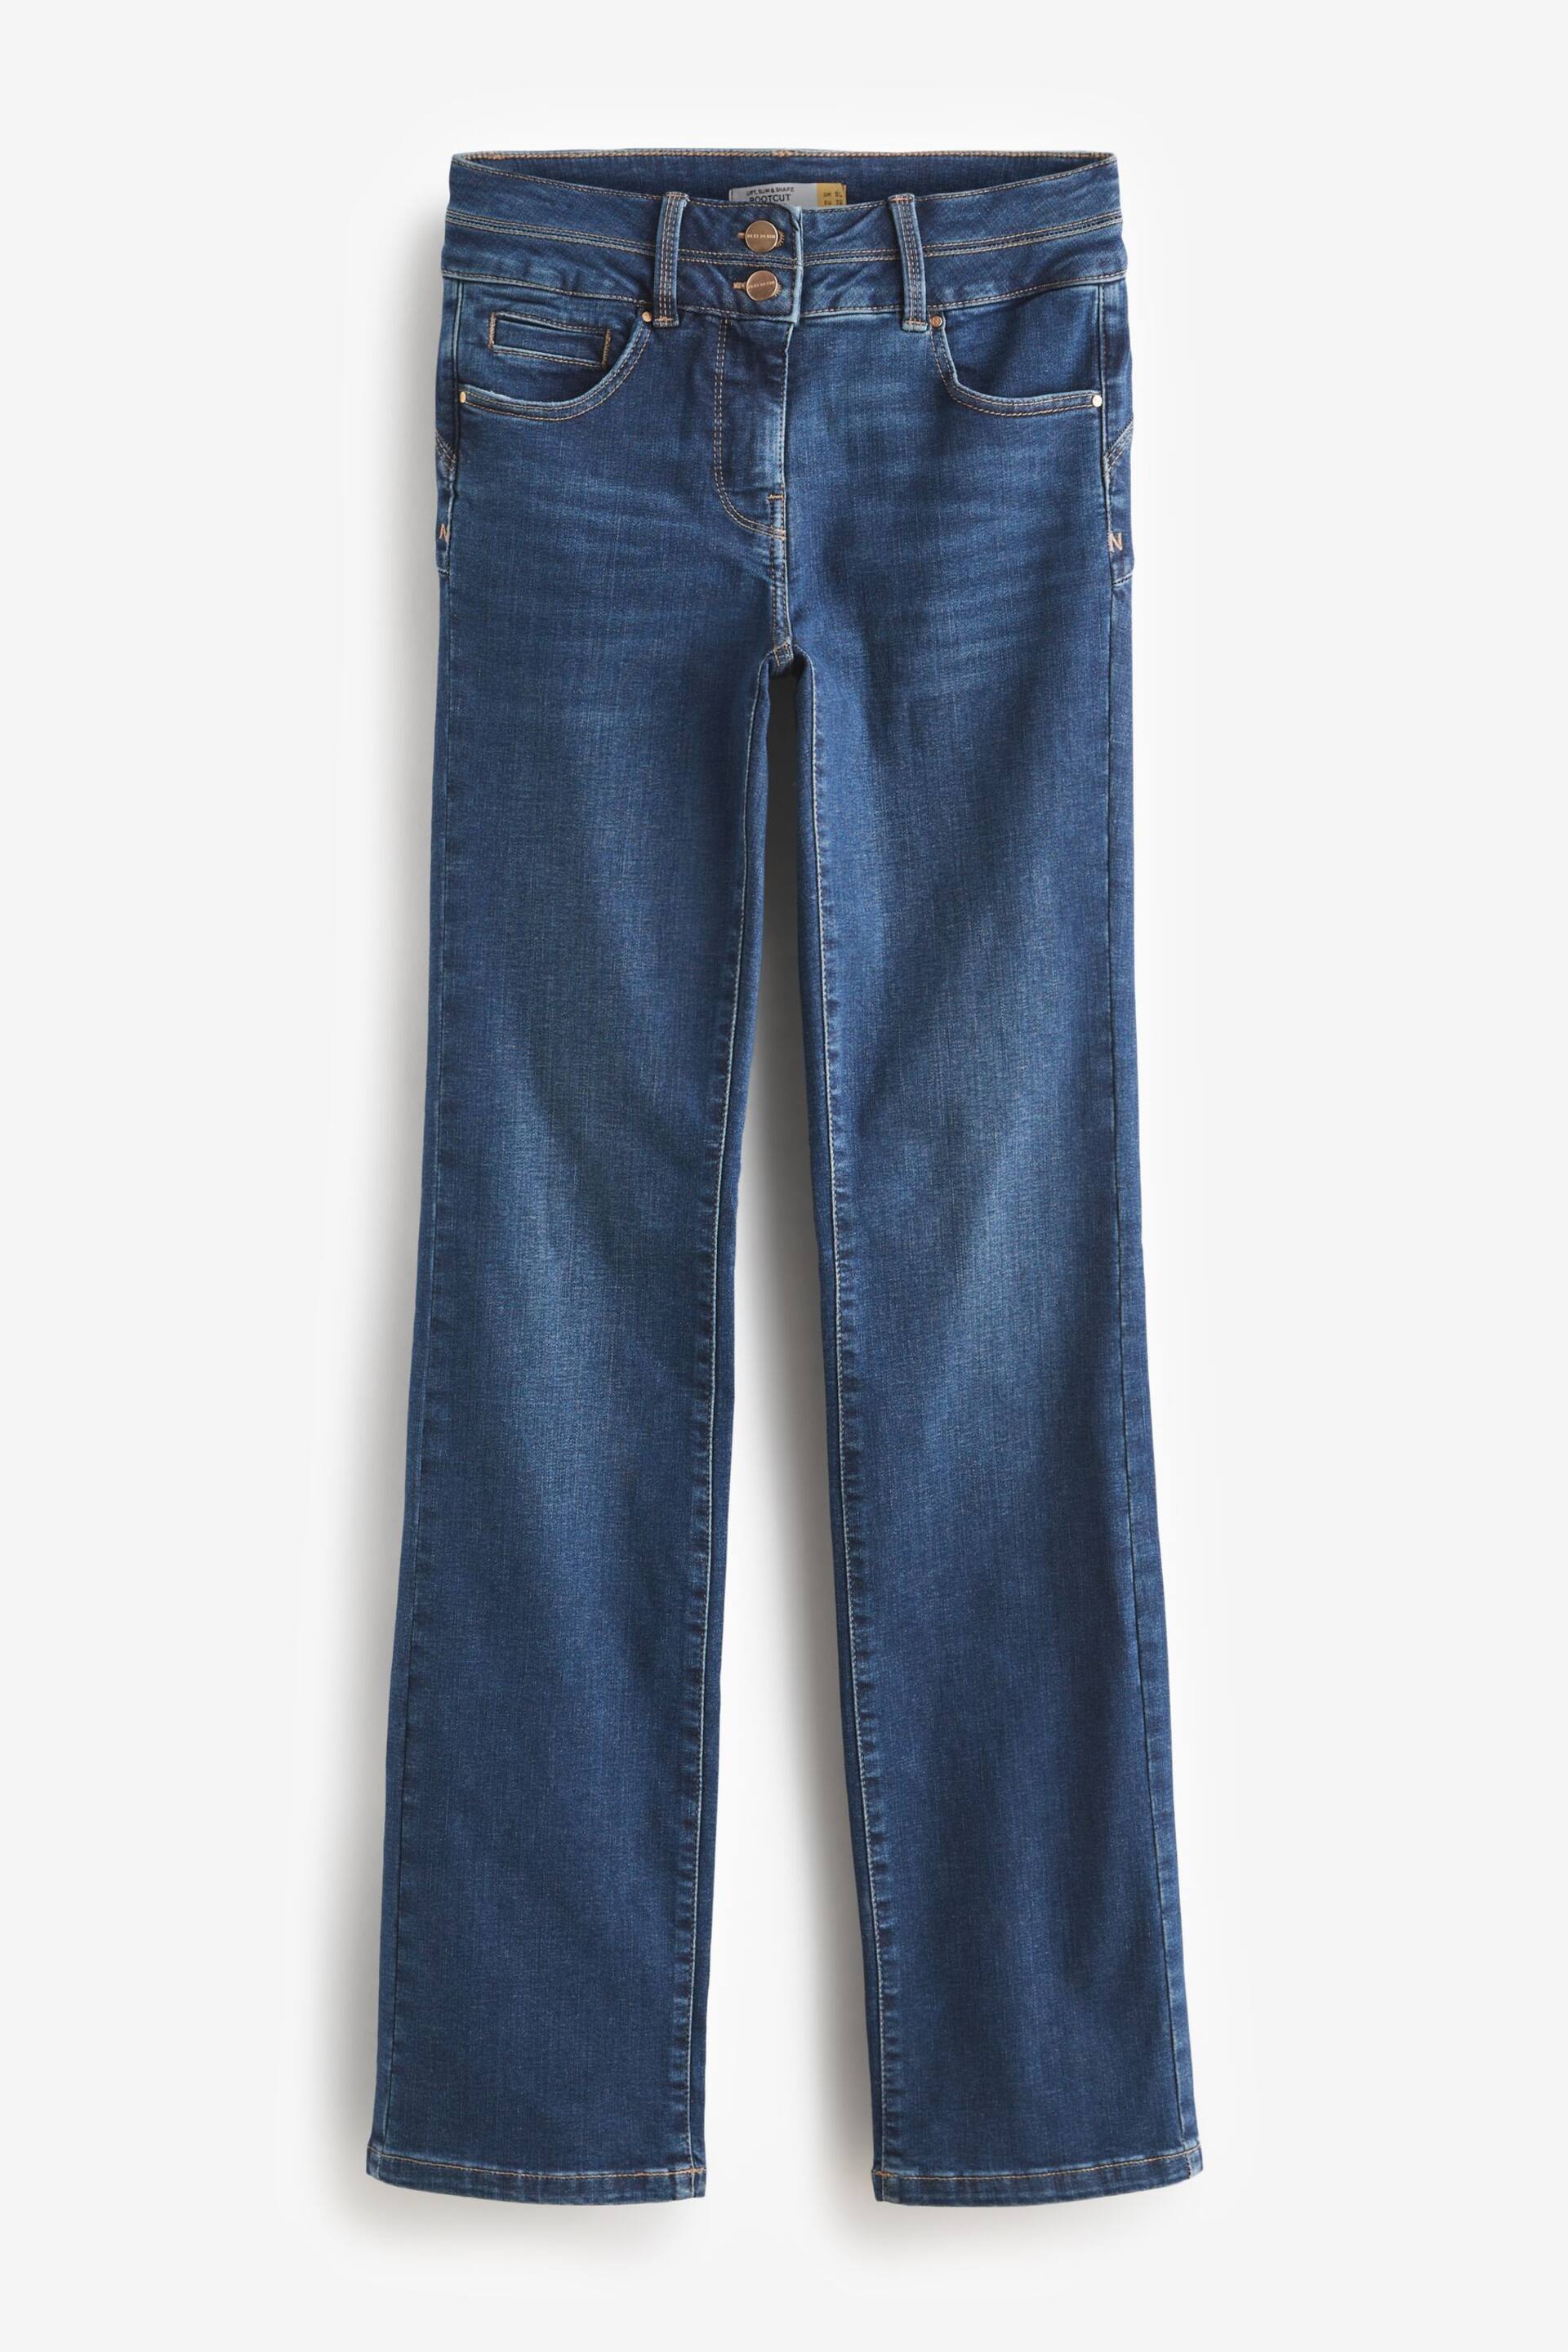 Mid Blue Wash Slim Lift And Shape Bootcut Jeans - Image 6 of 7